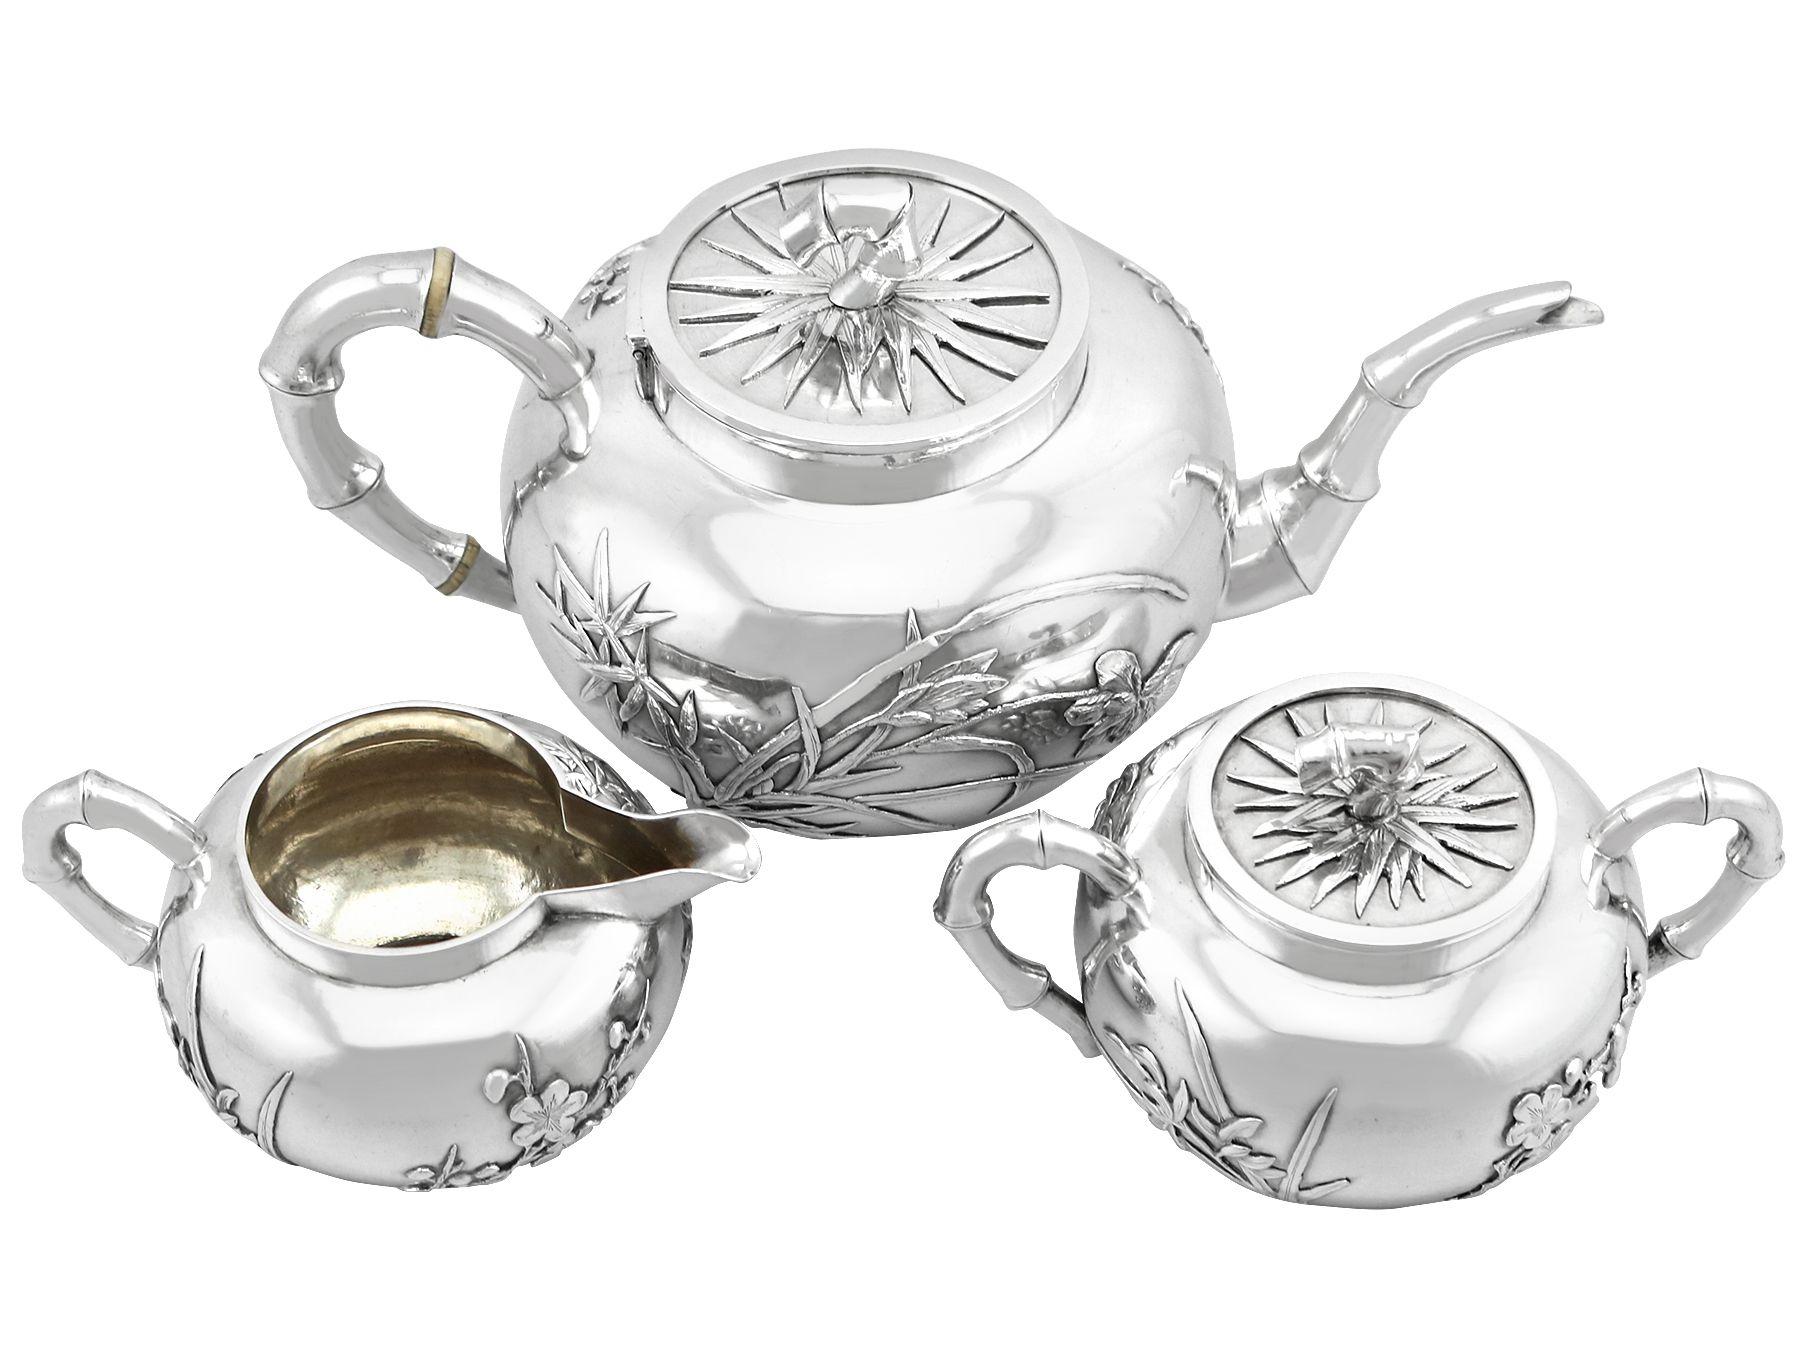 An exceptional, fine and impressive antique Chinese export silver three piece tea service; an addition to our diverse silver teaware collection

This exceptional antique tea set/service, in Chinese Export Silver consists of a teapot, cream jug and